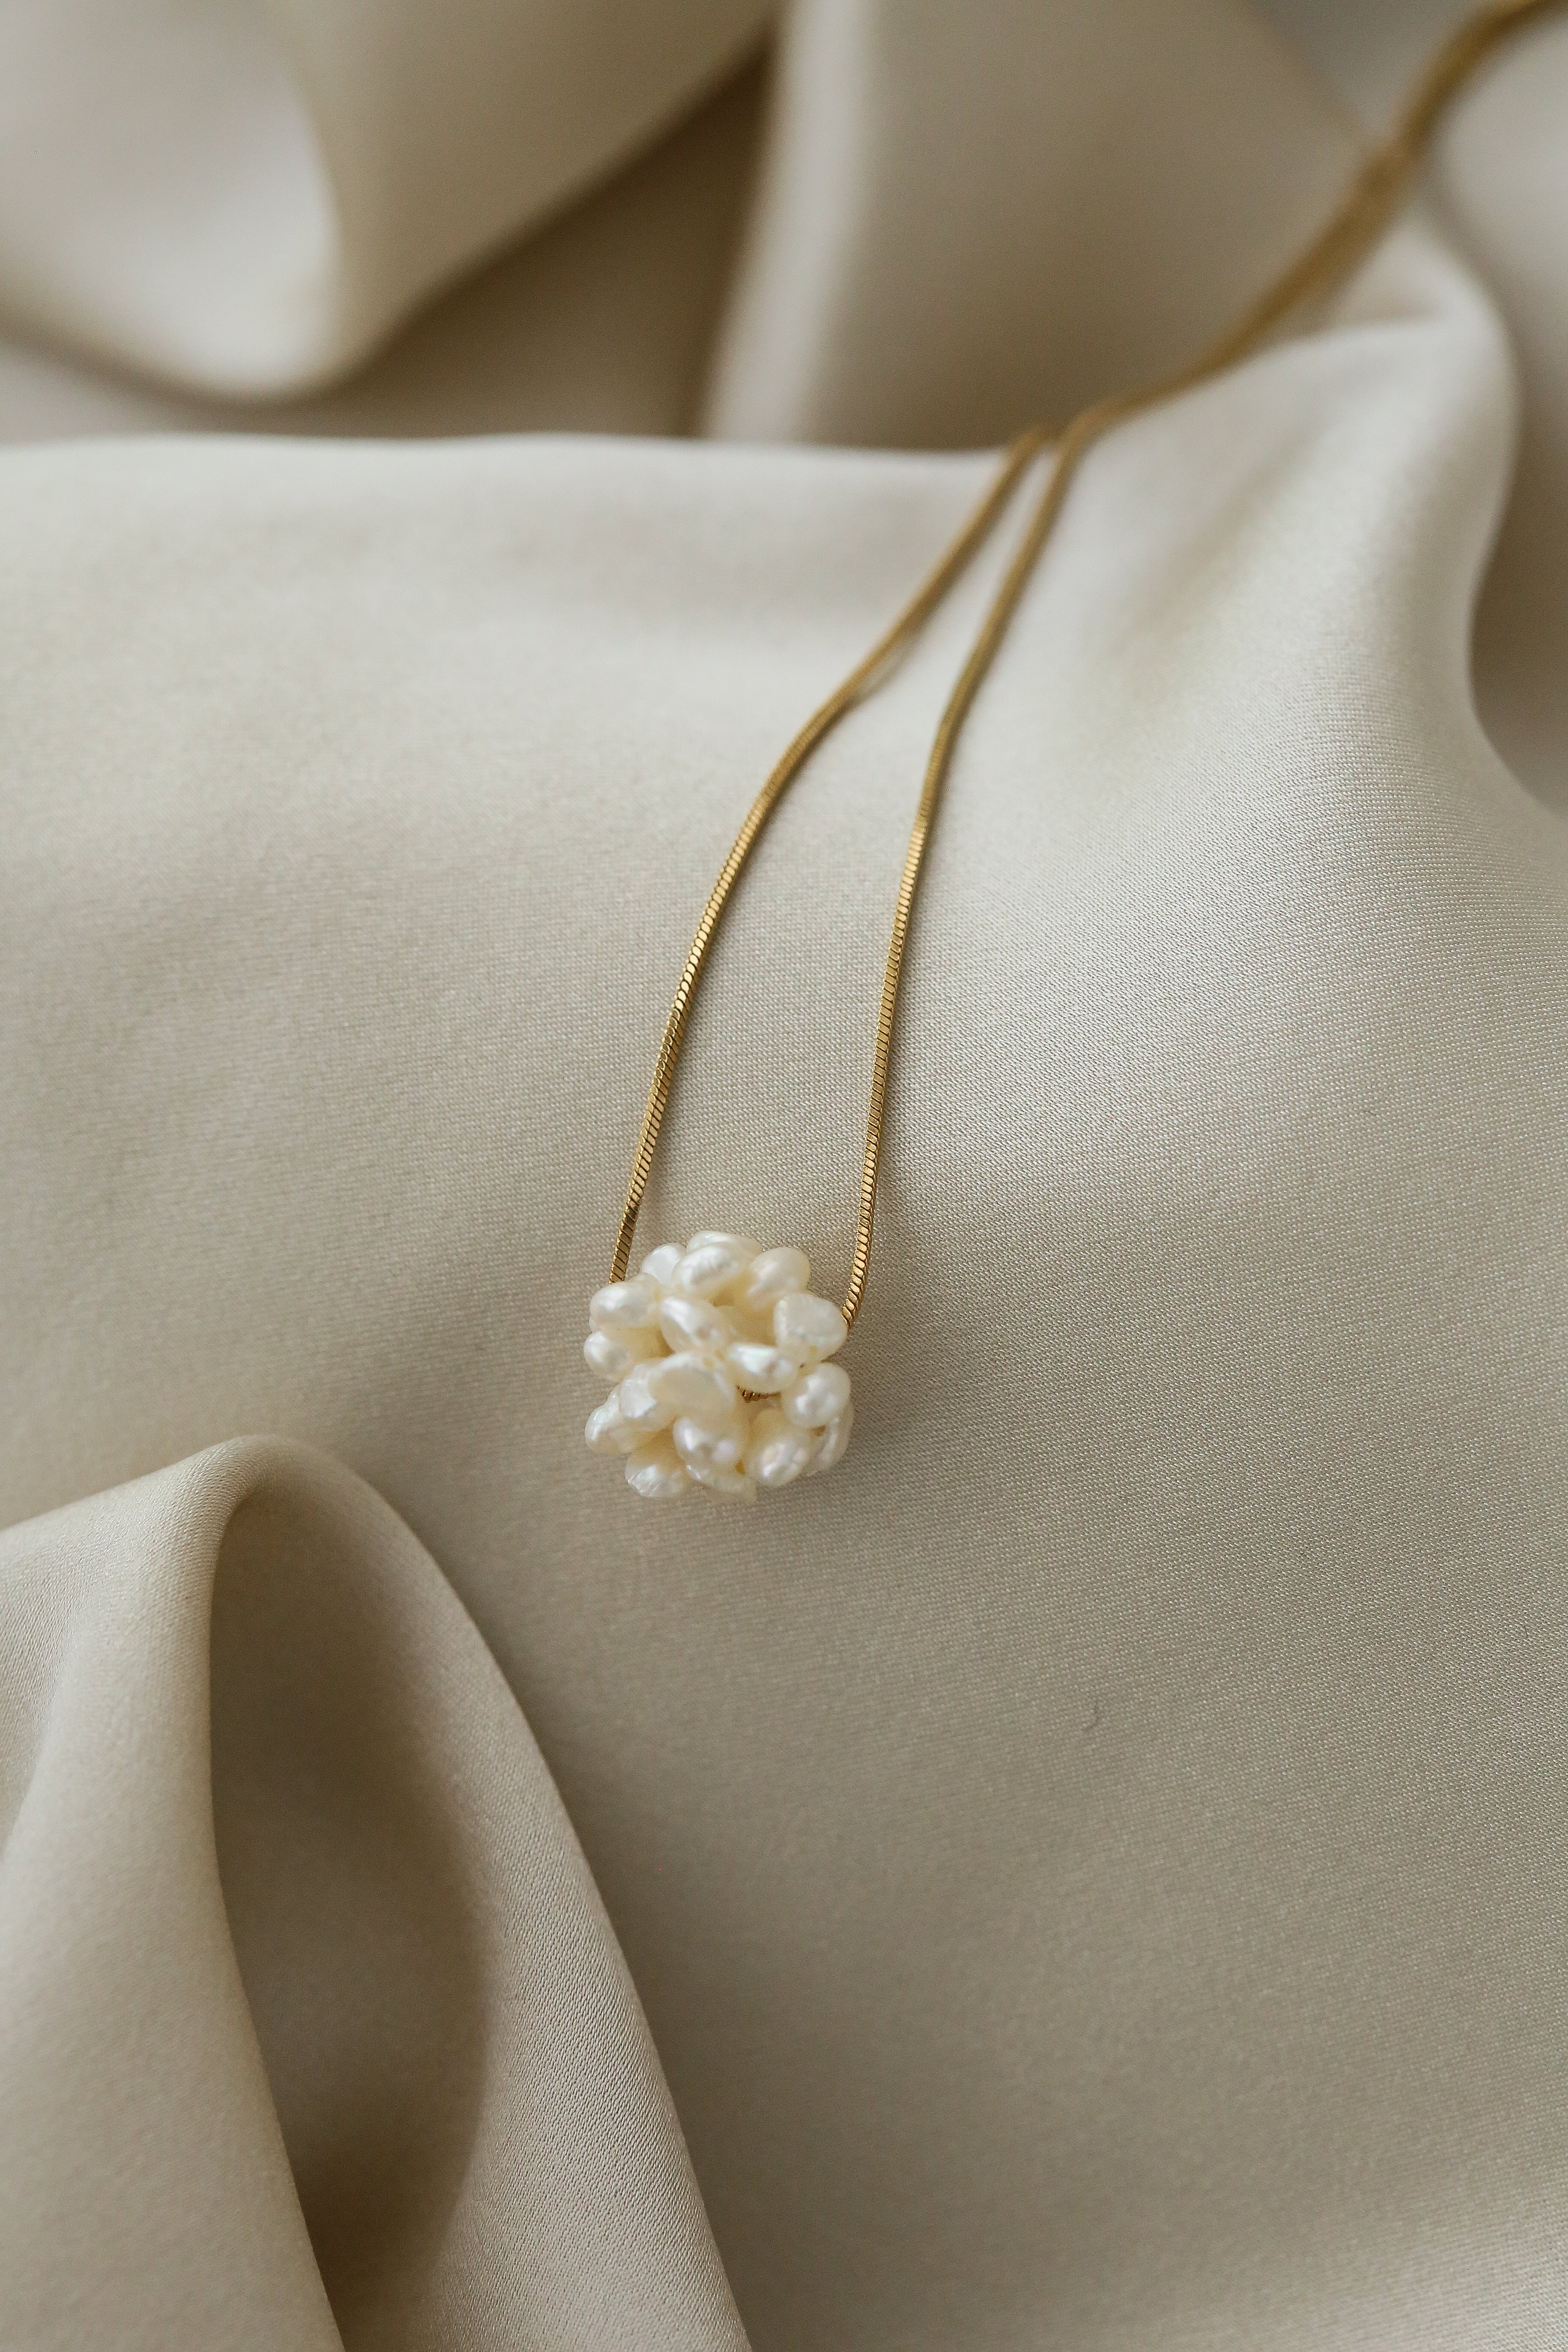 Willow Necklace - Boutique Minimaliste has waterproof, durable, elegant and vintage inspired jewelry